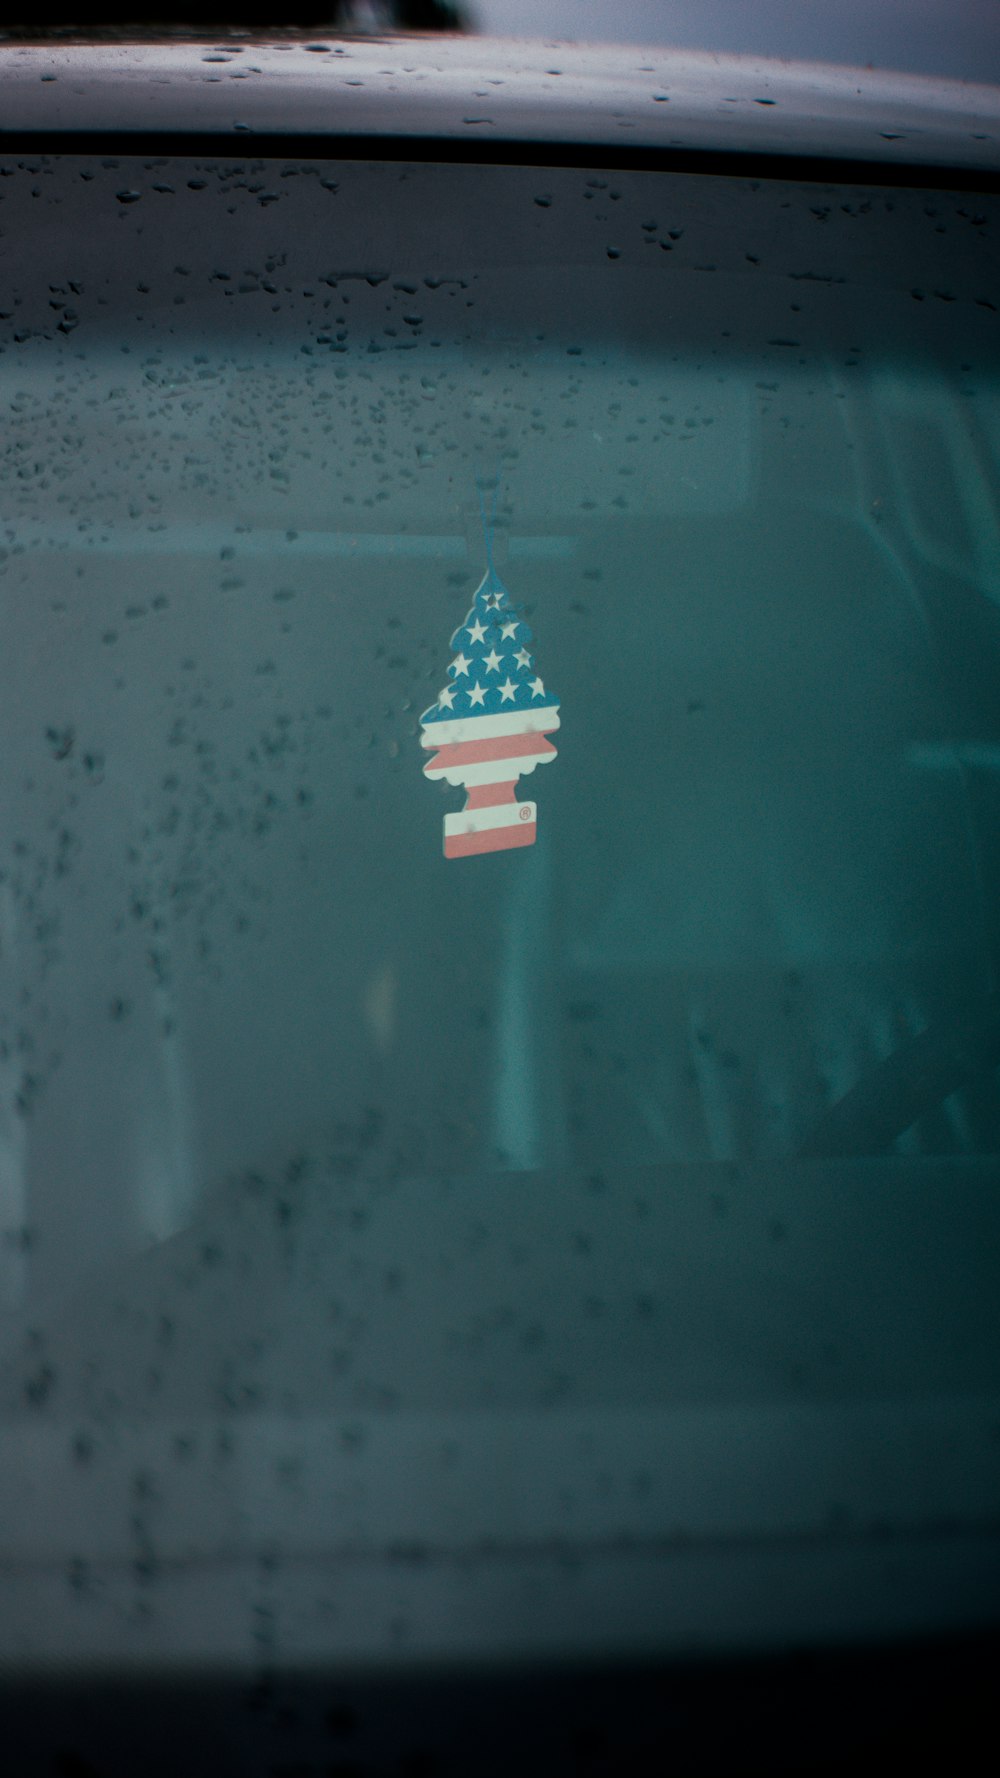 an american flag sticker on the windshield of a car